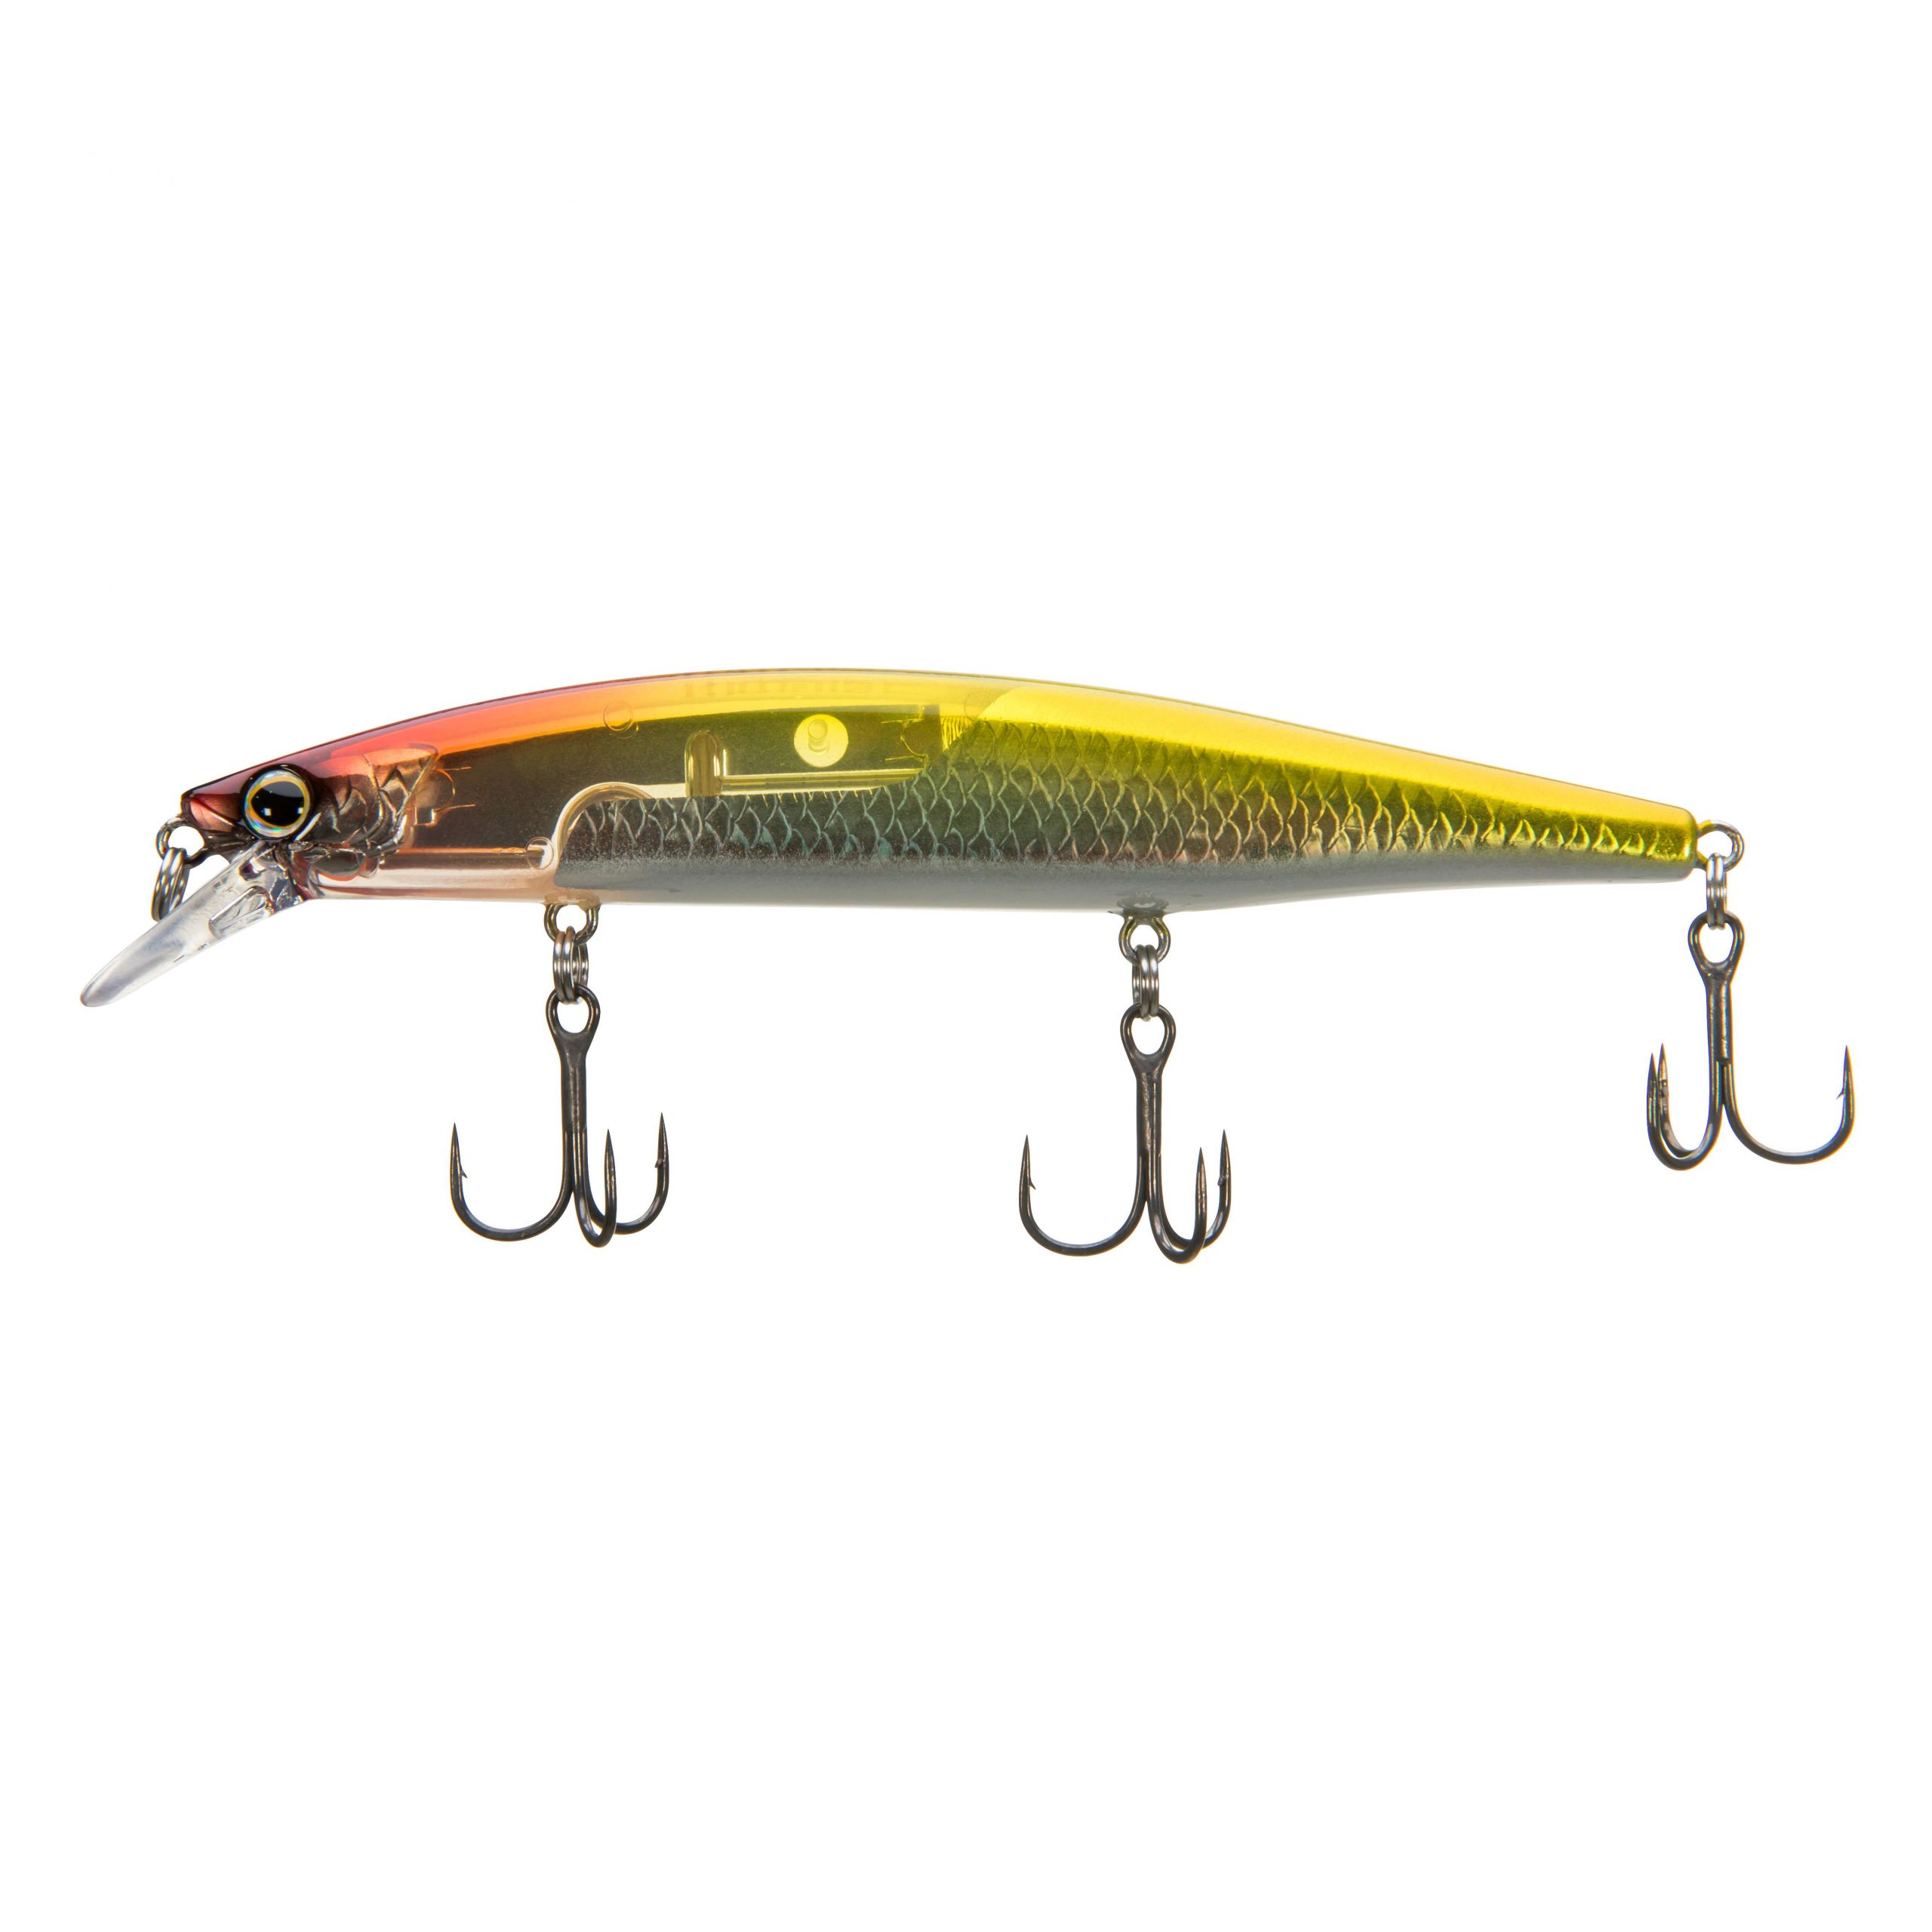 <p><strong>Shimano World Minnow 115SP</strong></p><p>If itâs possible to make a tech-loaded jerkbait, this is it. FLASH BOOST technology emits life-life shimmer and flash while the bait is in motion, while JET BOOST enhances casting distance, up to 22% farther with a stable, natural-looking posture upon landing on the surface. SCALE BOOST adds and even more realistic appearance with an industry-exclusive composite-pitch hologram. The World Minnow dives 4- to 6-feet on the retrieve. Available in 10 colors. Dimensions: 4.5 inches long, 5/8-ounce. $19.99. <a href=